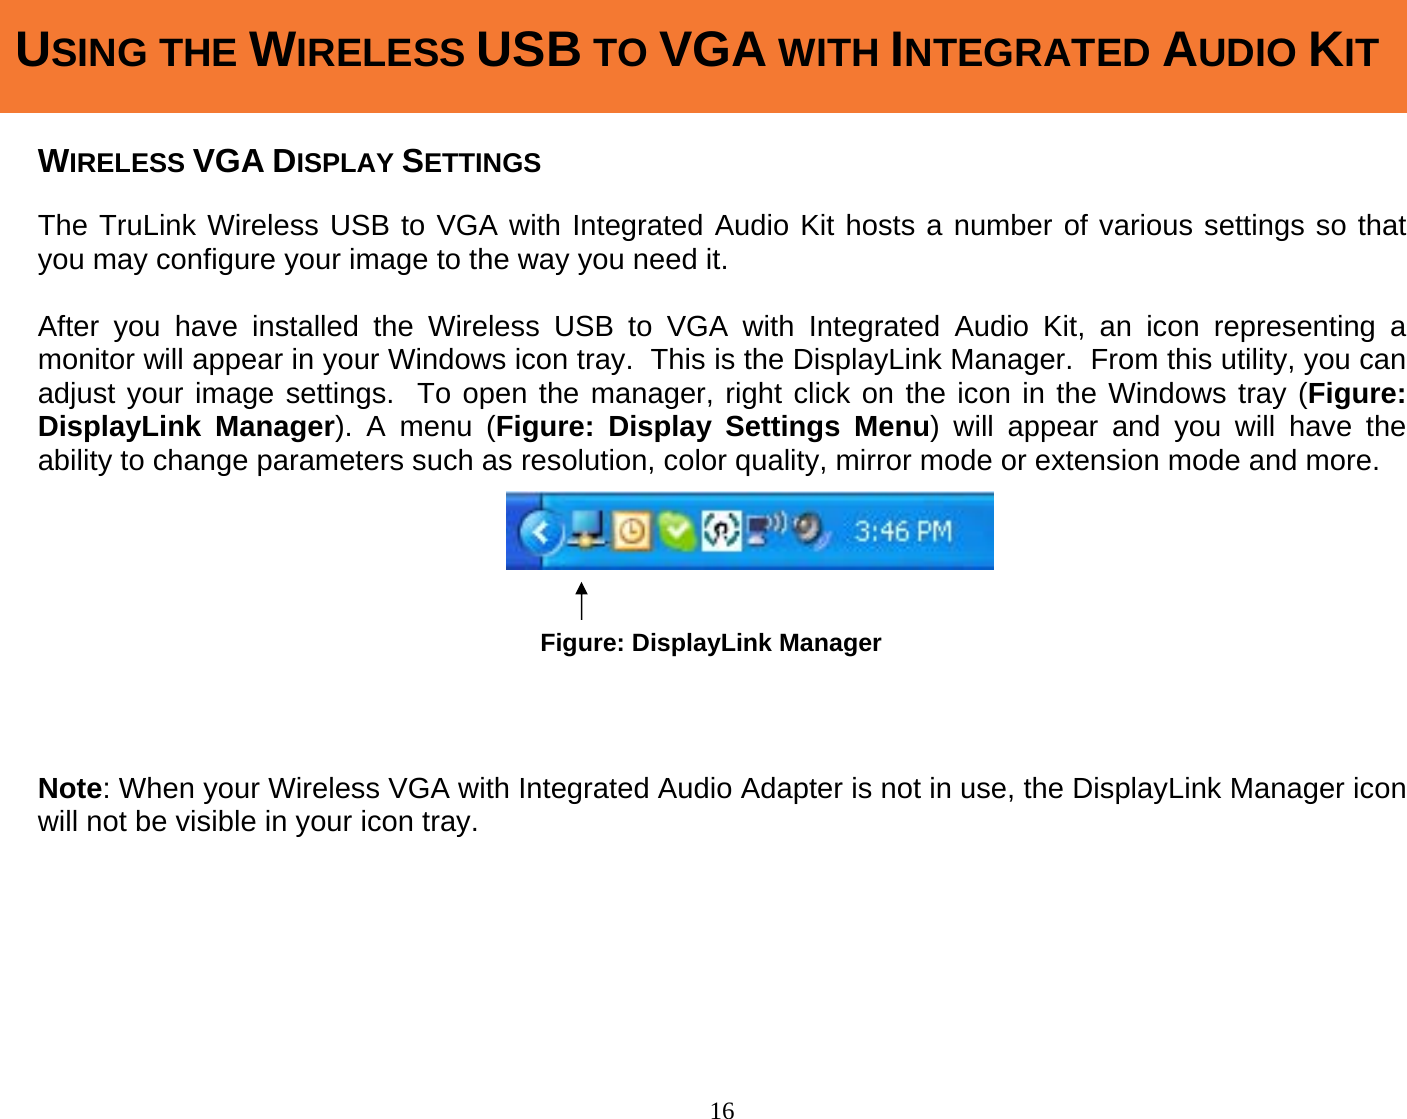 16  WIRELESS VGA DISPLAY SETTINGS  The TruLink Wireless USB to VGA with Integrated Audio Kit hosts a number of various settings so that you may configure your image to the way you need it.    After you have installed the Wireless USB to VGA with Integrated Audio Kit, an icon representing a monitor will appear in your Windows icon tray.  This is the DisplayLink Manager.  From this utility, you can adjust your image settings.  To open the manager, right click on the icon in the Windows tray (Figure: DisplayLink Manager). A menu (Figure: Display Settings Menu) will appear and you will have the ability to change parameters such as resolution, color quality, mirror mode or extension mode and more.             Note: When your Wireless VGA with Integrated Audio Adapter is not in use, the DisplayLink Manager icon will not be visible in your icon tray.       USING THE WIRELESS USB TO VGA WITH INTEGRATED AUDIO KITFigure: DisplayLink Manager 